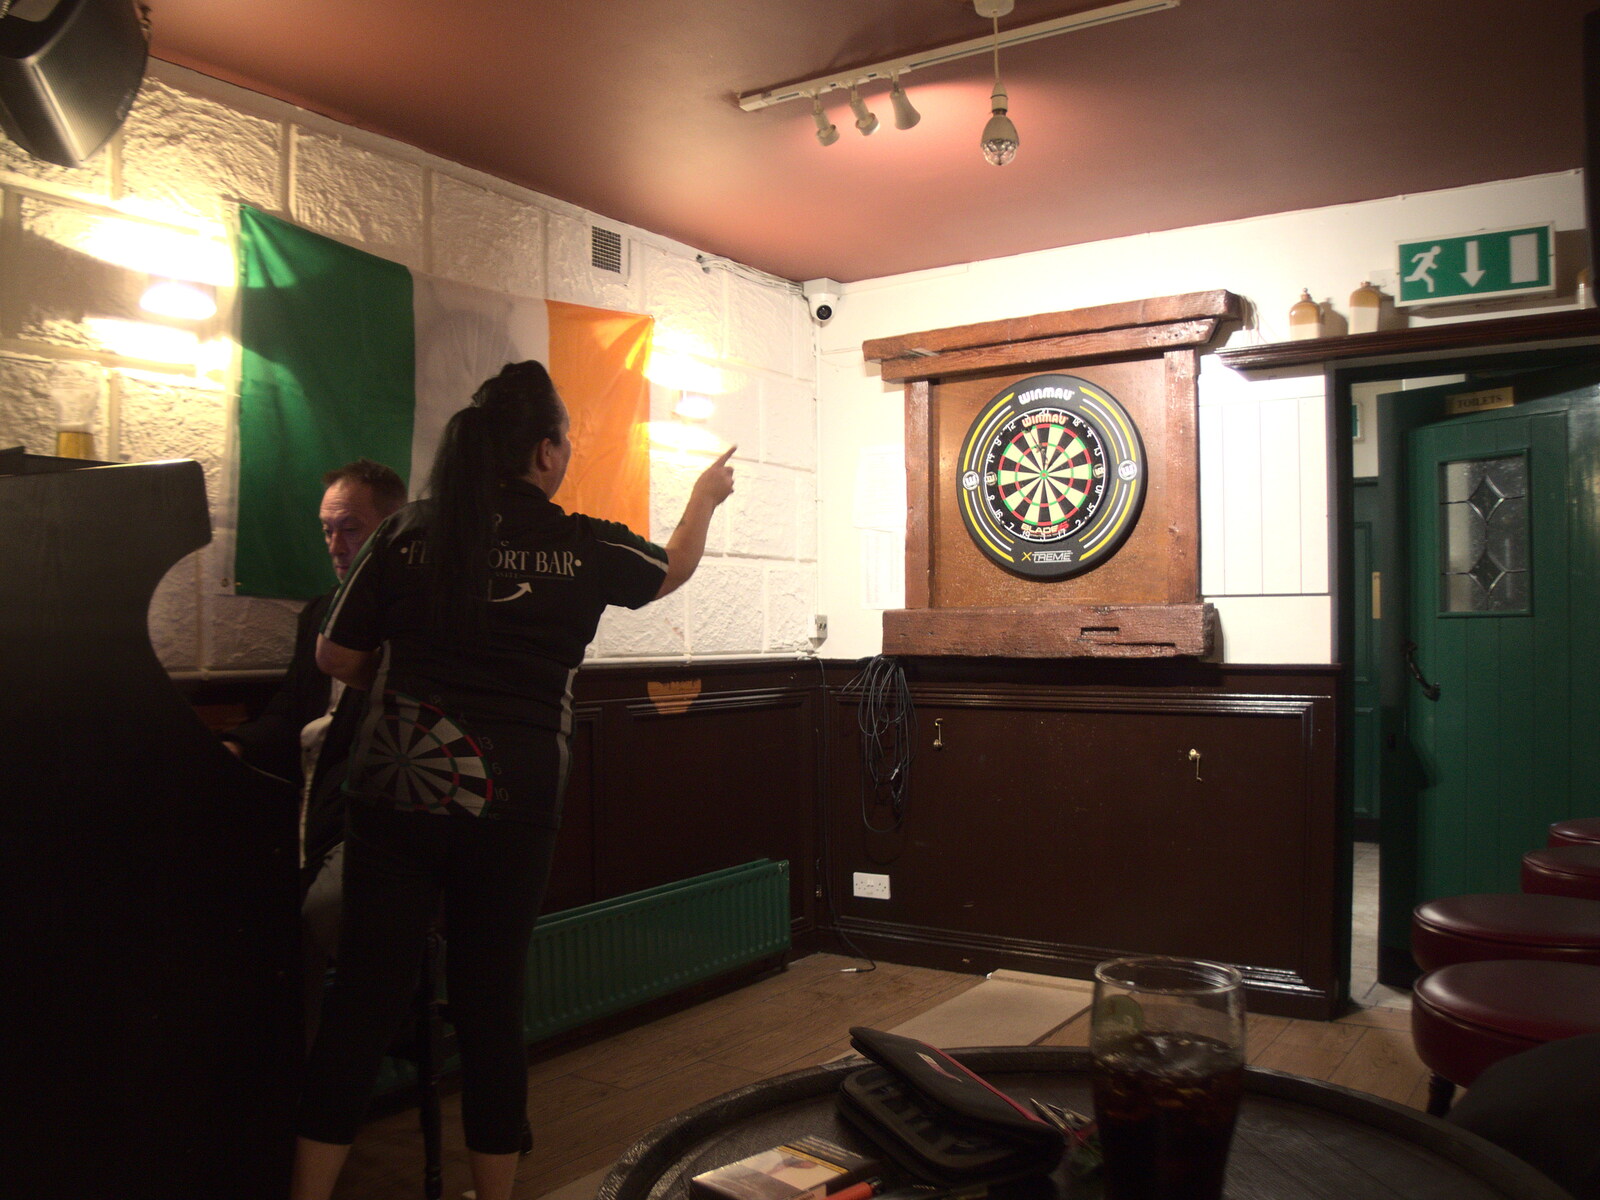 Greencastle, Doagh and Malin Head, County Donegal, Ireland - 19th April 2022: There's a darts match going on